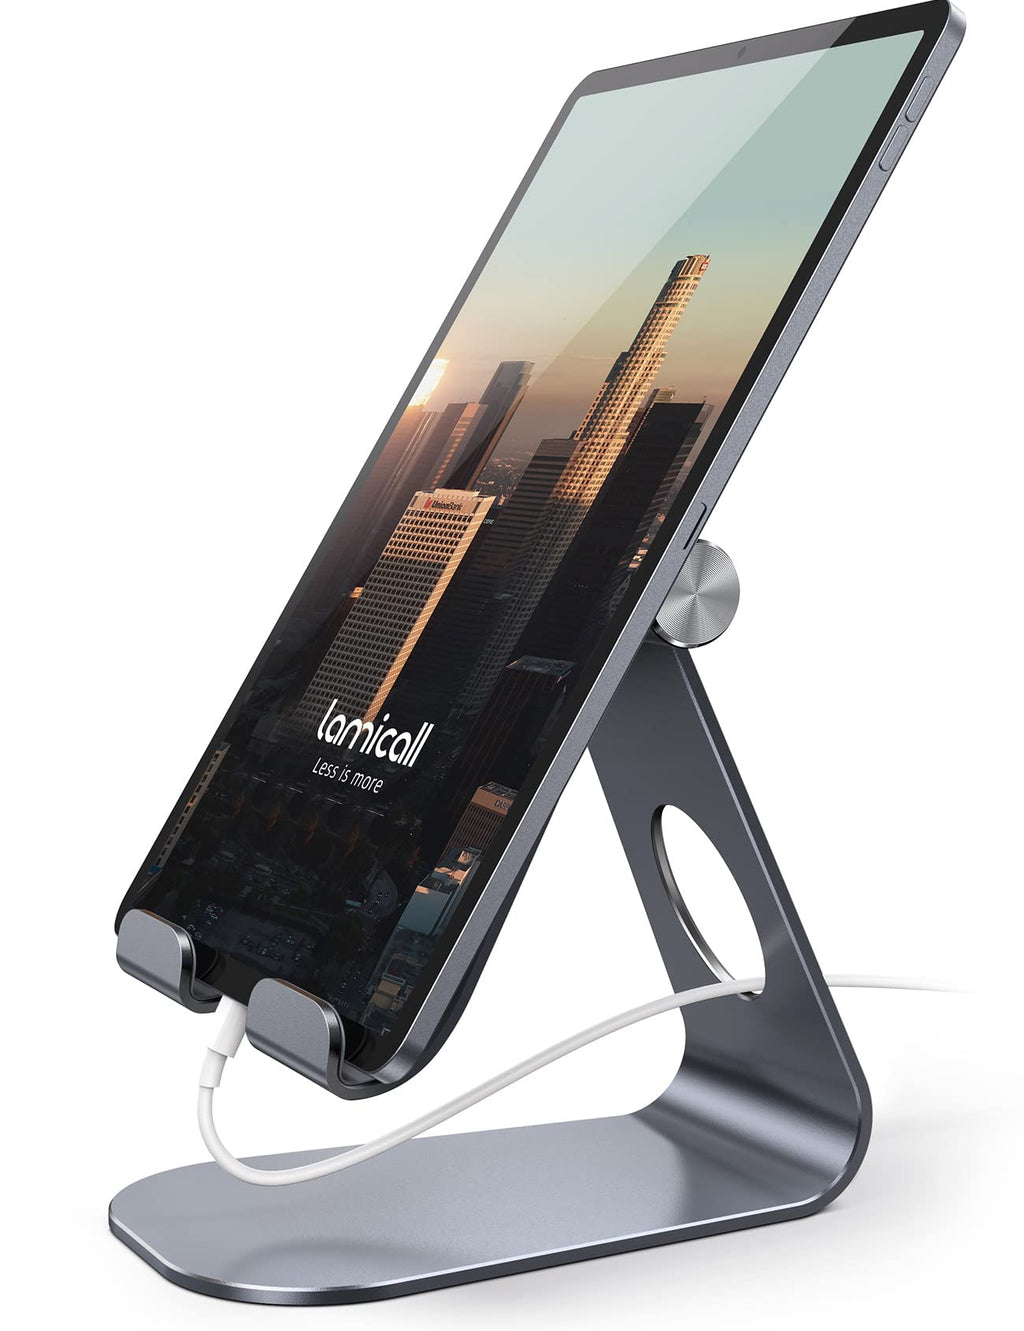  [AUSTRALIA] - Tablet Stand Adjustable, Lamicall Tablet Stand : Desktop Stand Holder Dock Suitable to New iPad 2017 Pro 9.7, 10.5, Air Mini 2 3 4, Kindle, Nexus, Accessories, Tab, E-Reader, (4-13 inch) - Gray